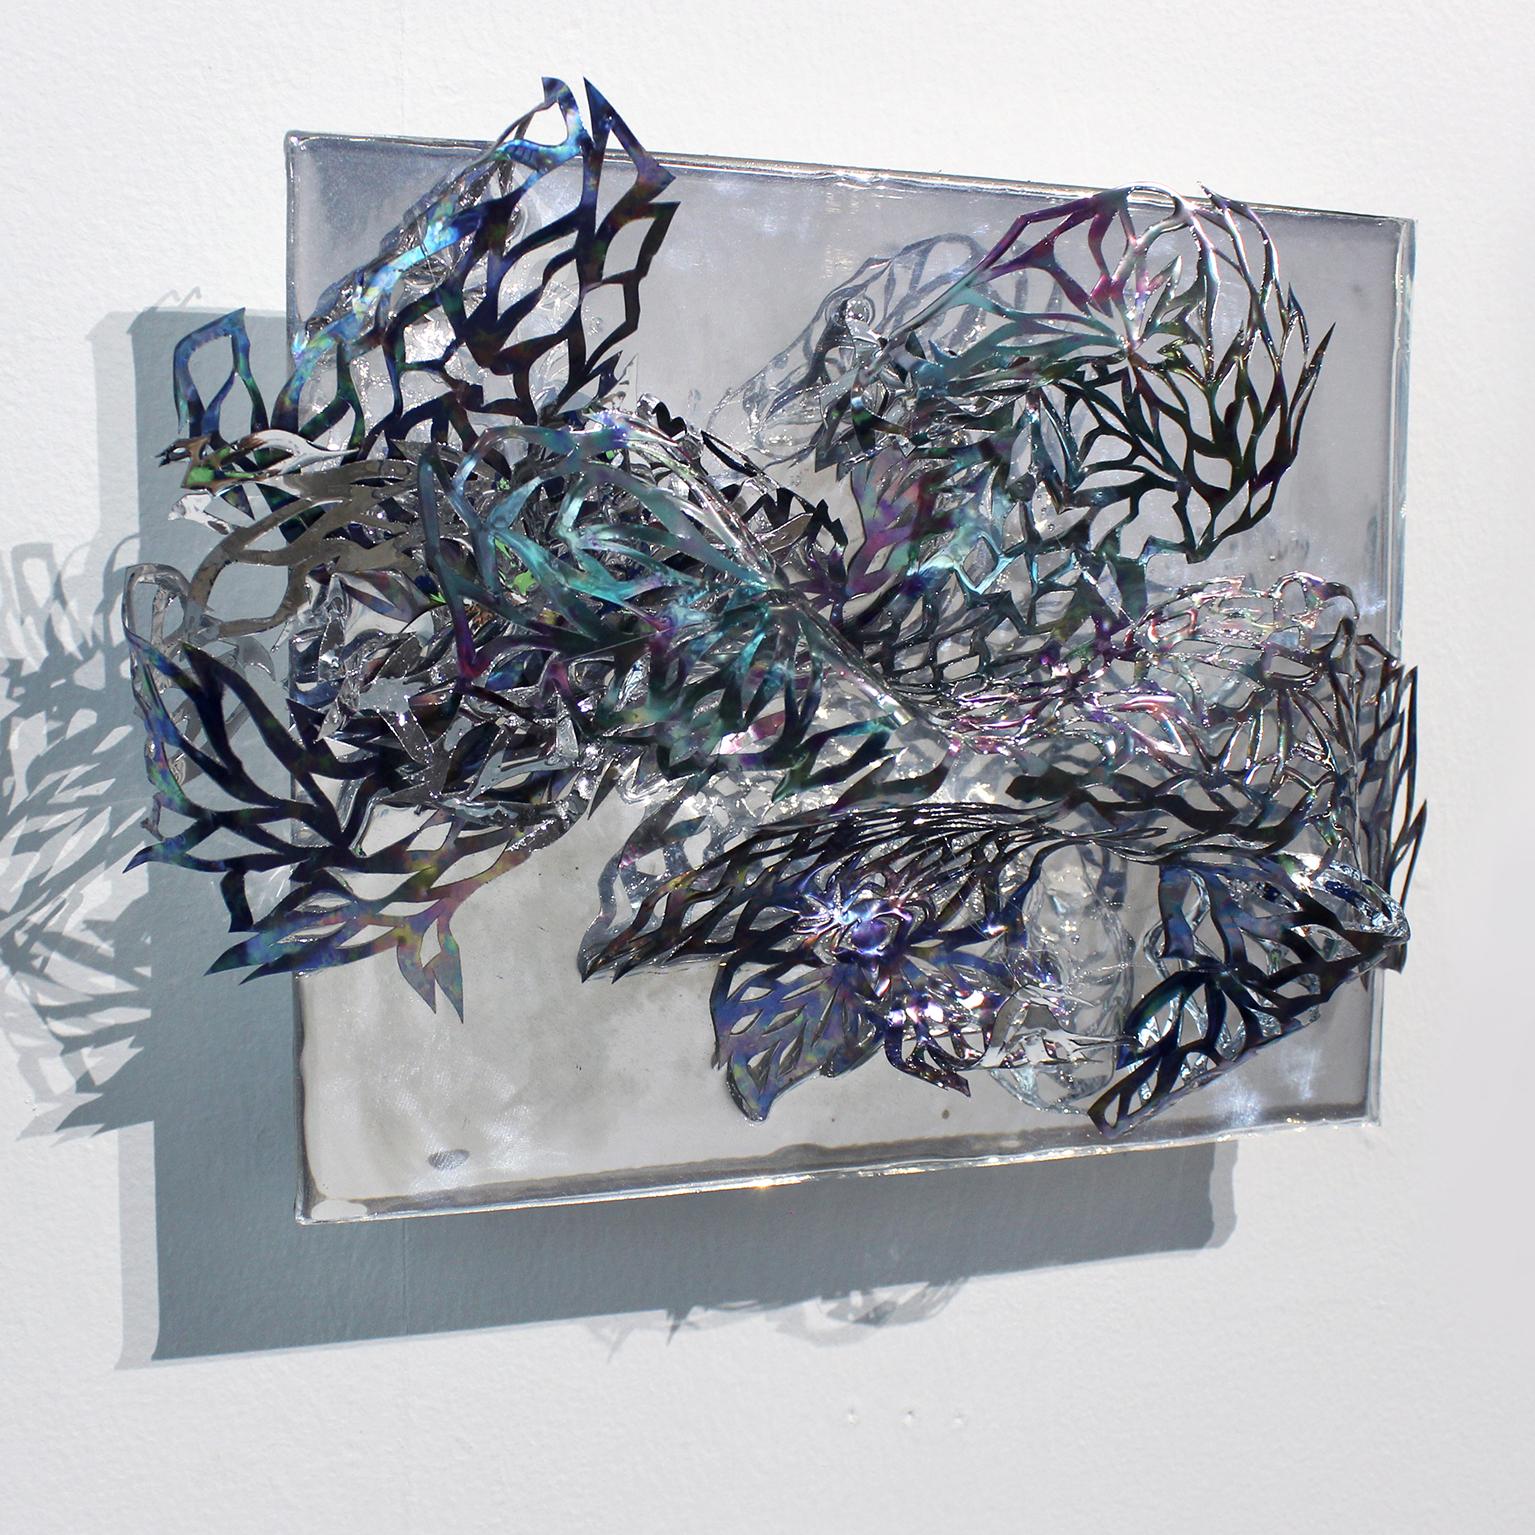 Medium: hand cut mylar, acetate, resin, acrylic

Julia Sinelnikova is an interdisciplinary artist who works with holograms, performance, and digital culture. Her light installations have been exhibited internationally, and she has performed widely